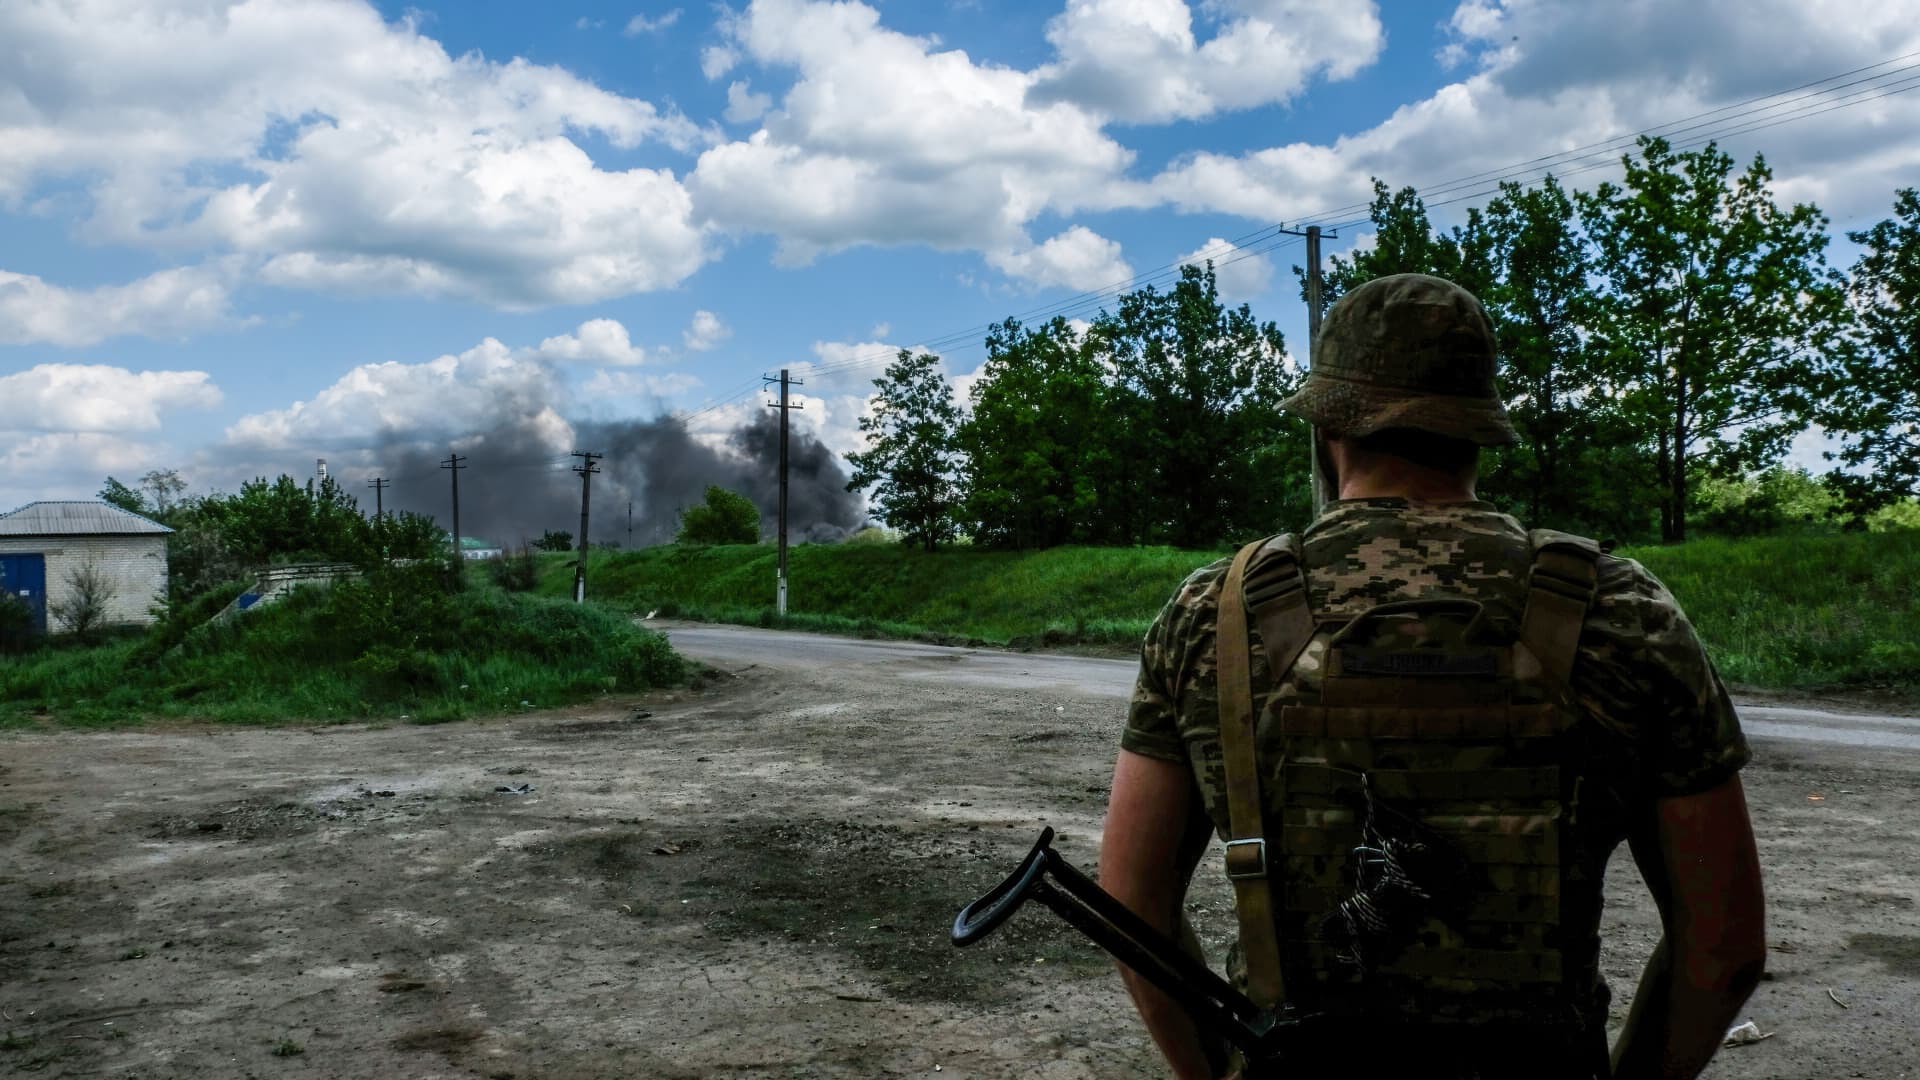 Russian forces have began direct assaults on built-up areas of Severodonetsk, a city in the Luhansk Oblast and one of Russia's immediate tactical priorities.